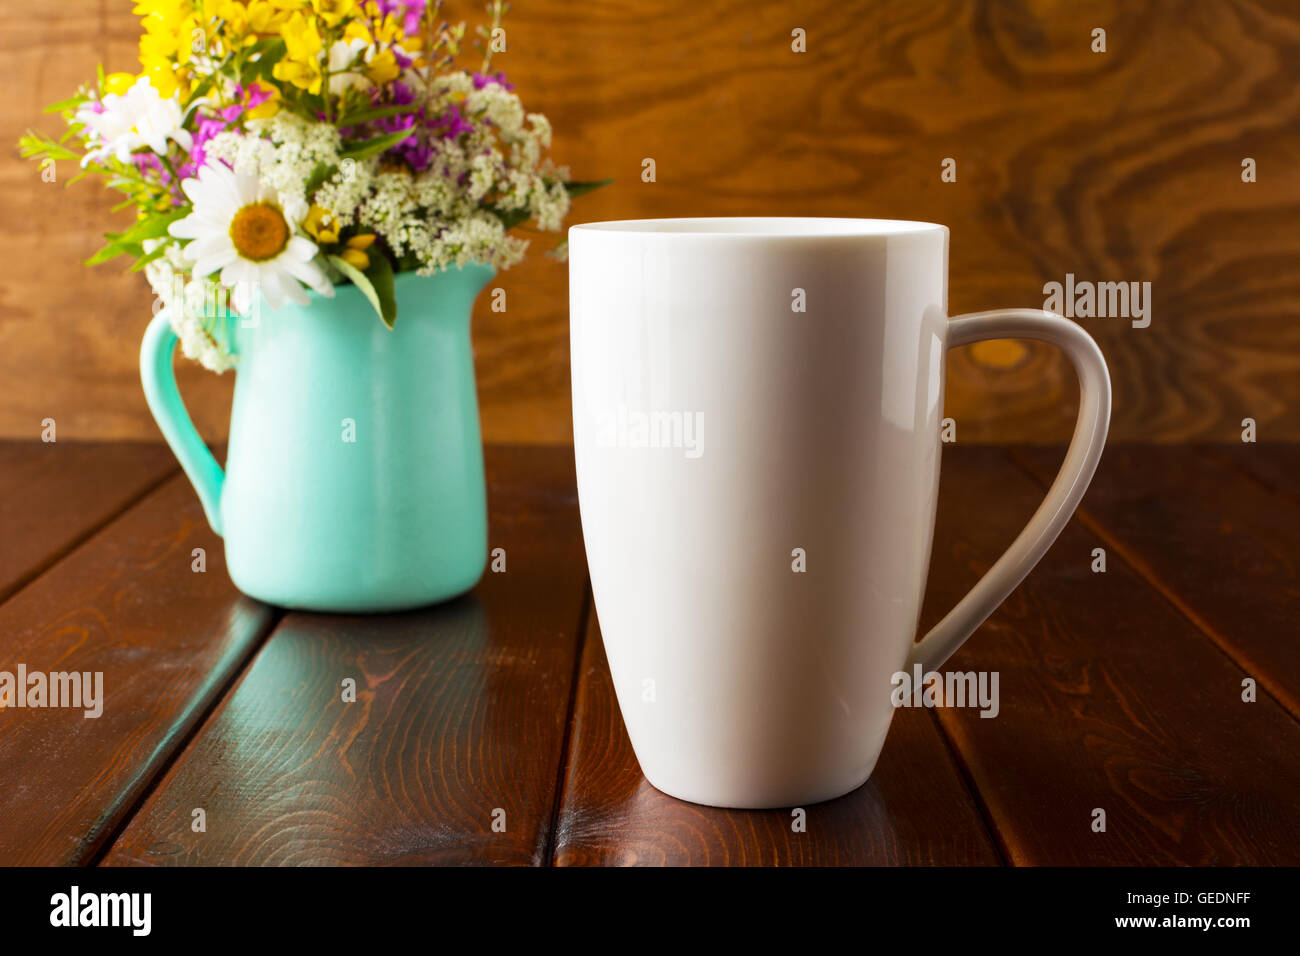 Coffee mug mockup with mint green flowerpot. Coffee cup mock-up for brand promotion.  Empty mug mockup for design presentation. Stock Photo